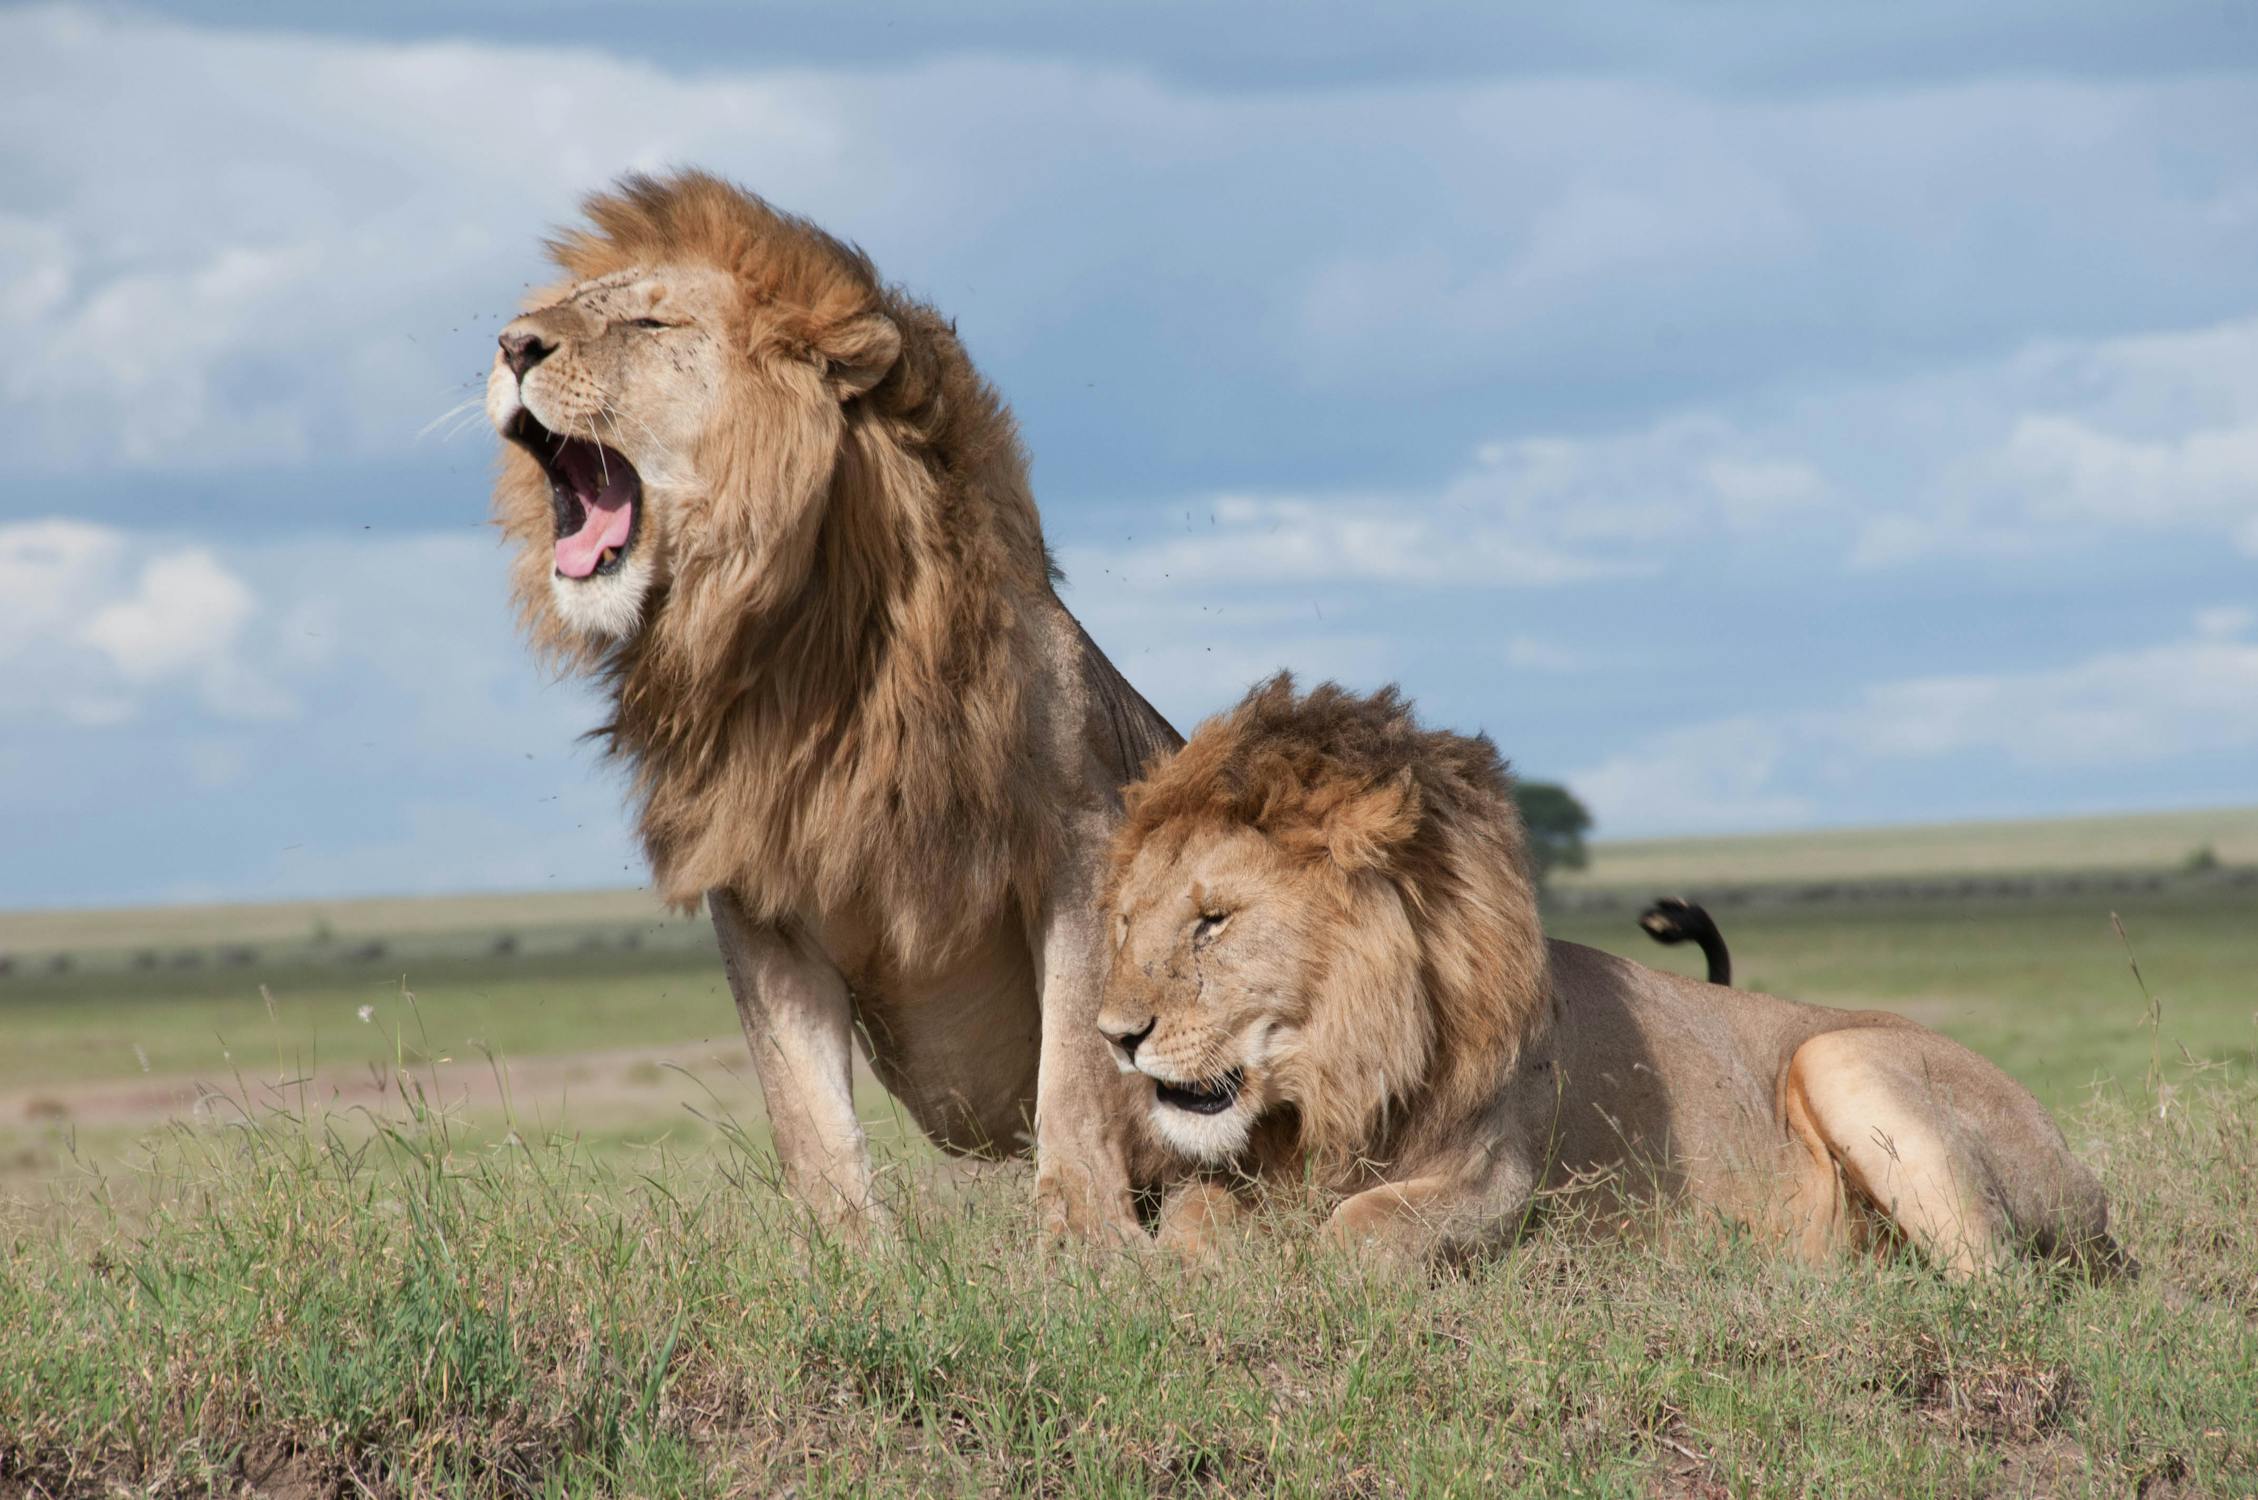 two lions in a field, one lying down, another sitting upright and yawning